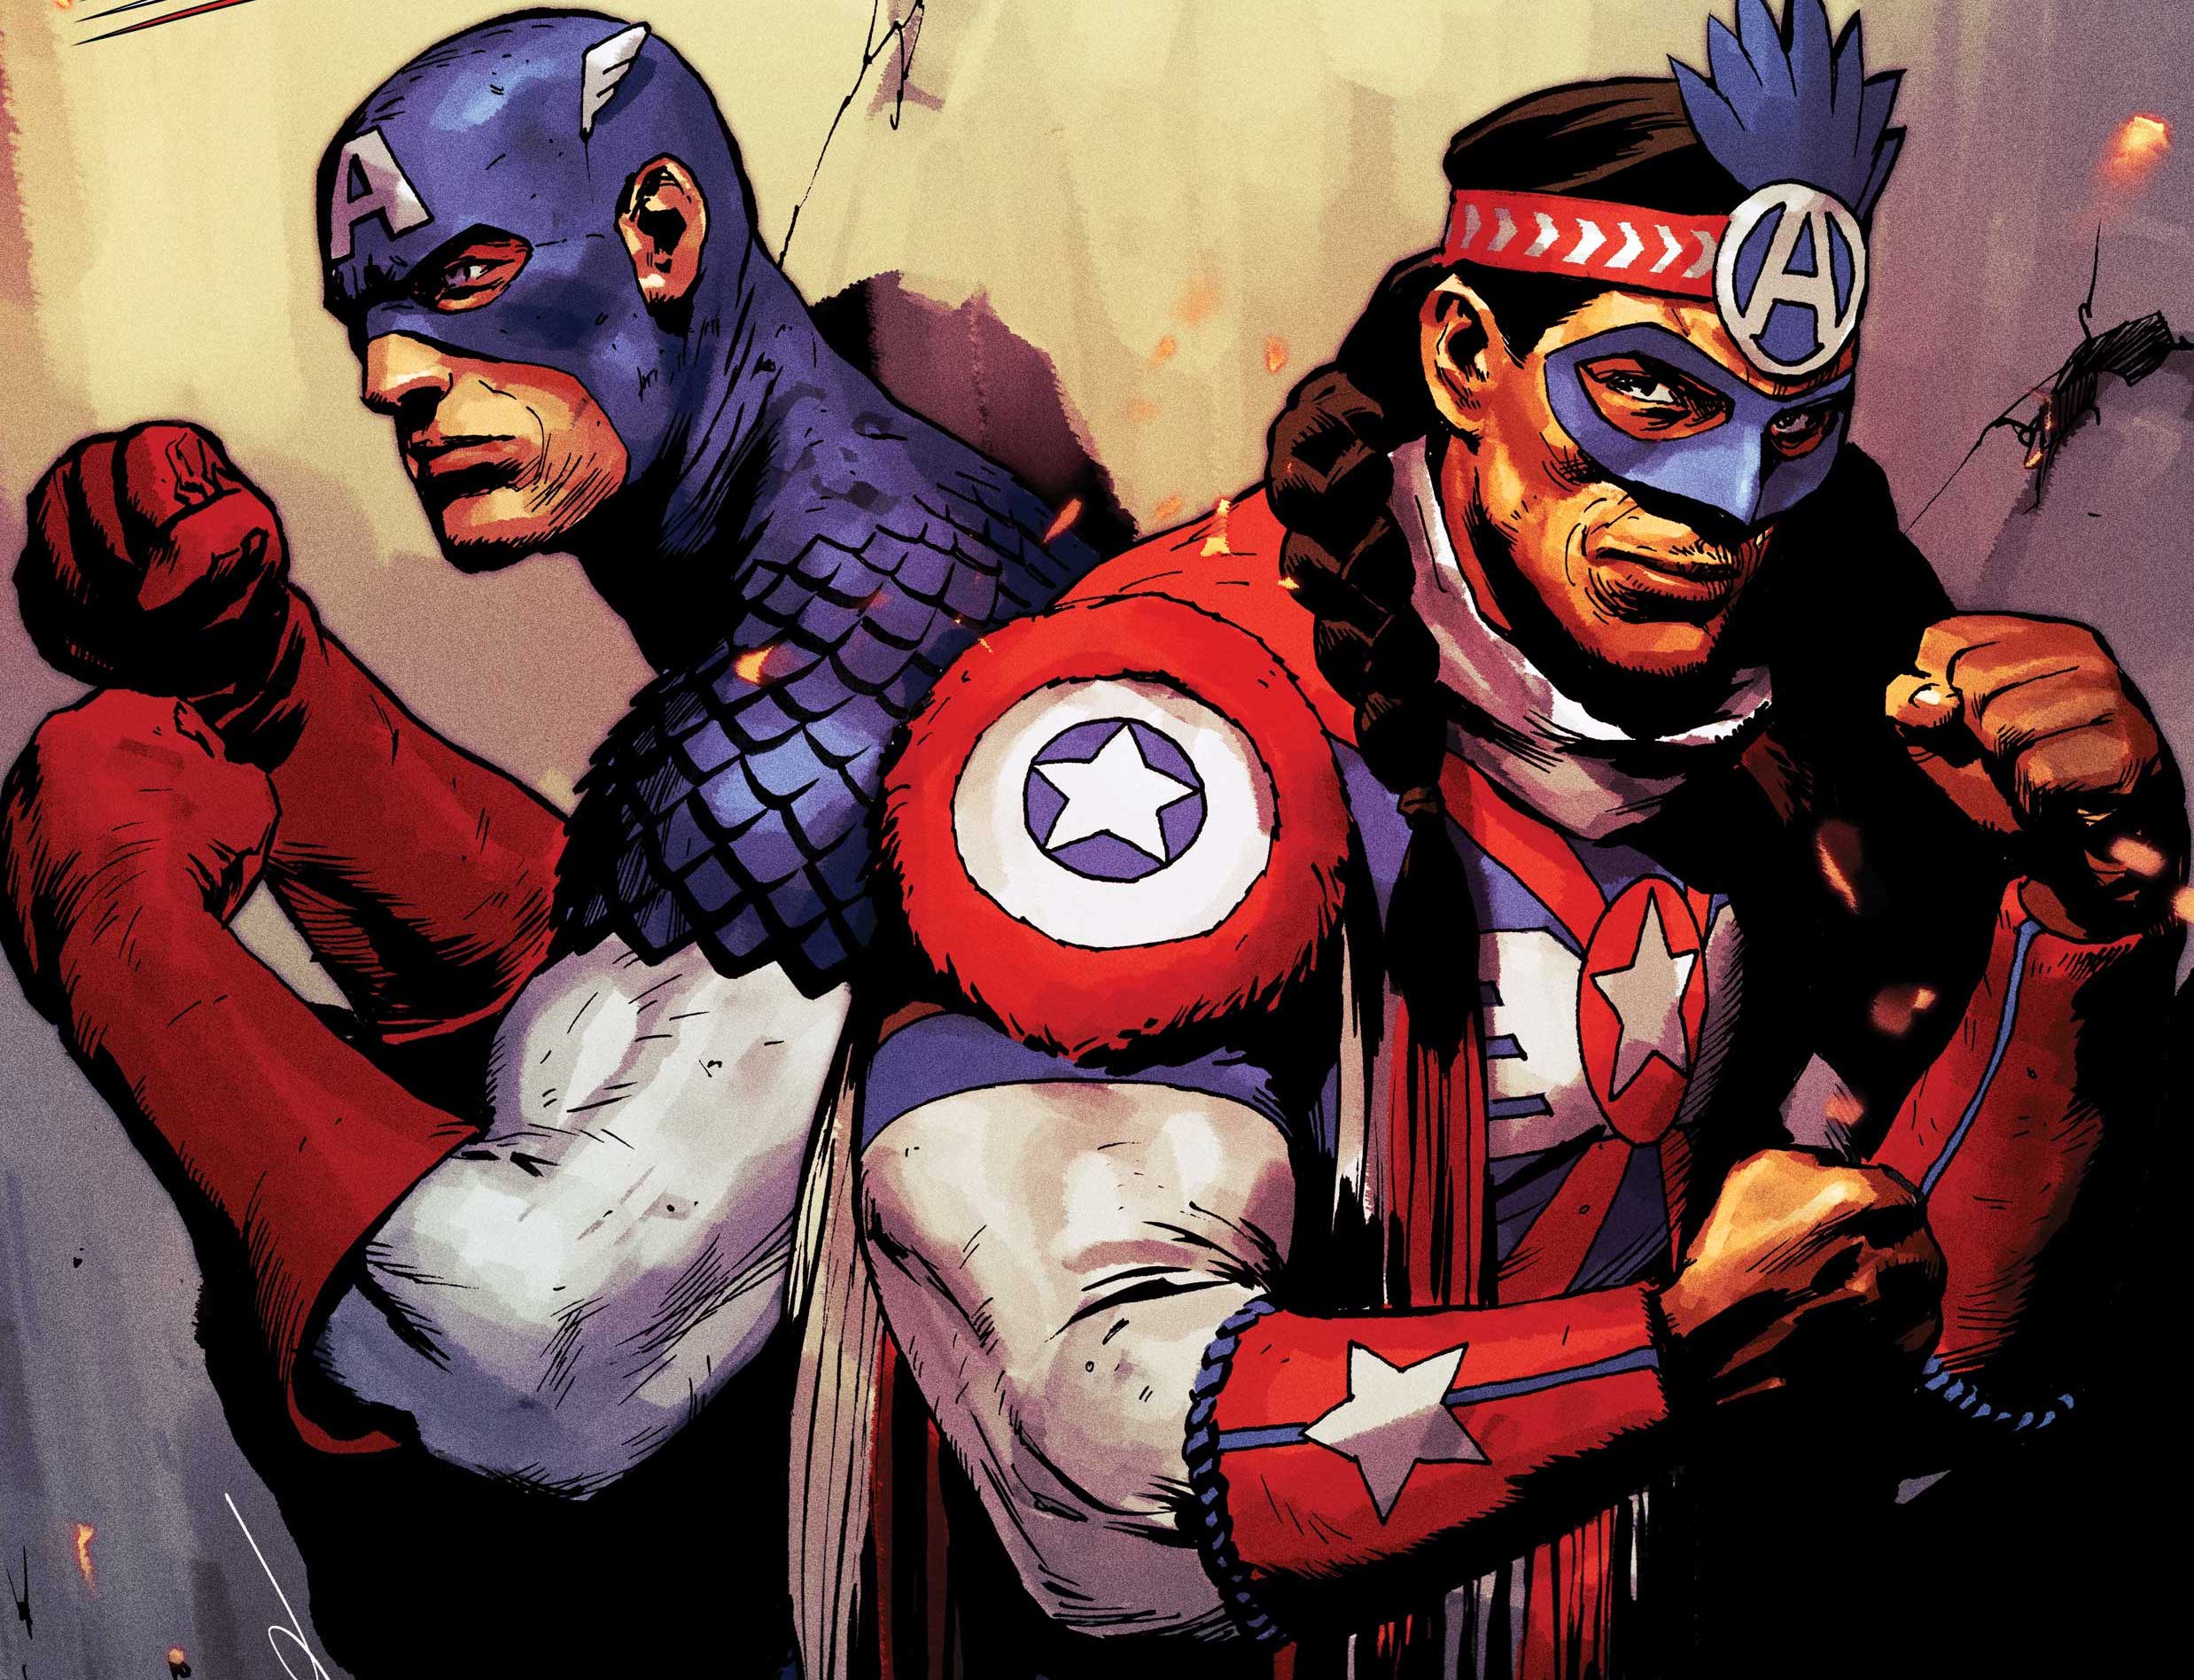 Steve Rogers teams up with Native American shield-bearer in 'The United States of Captain America' #3